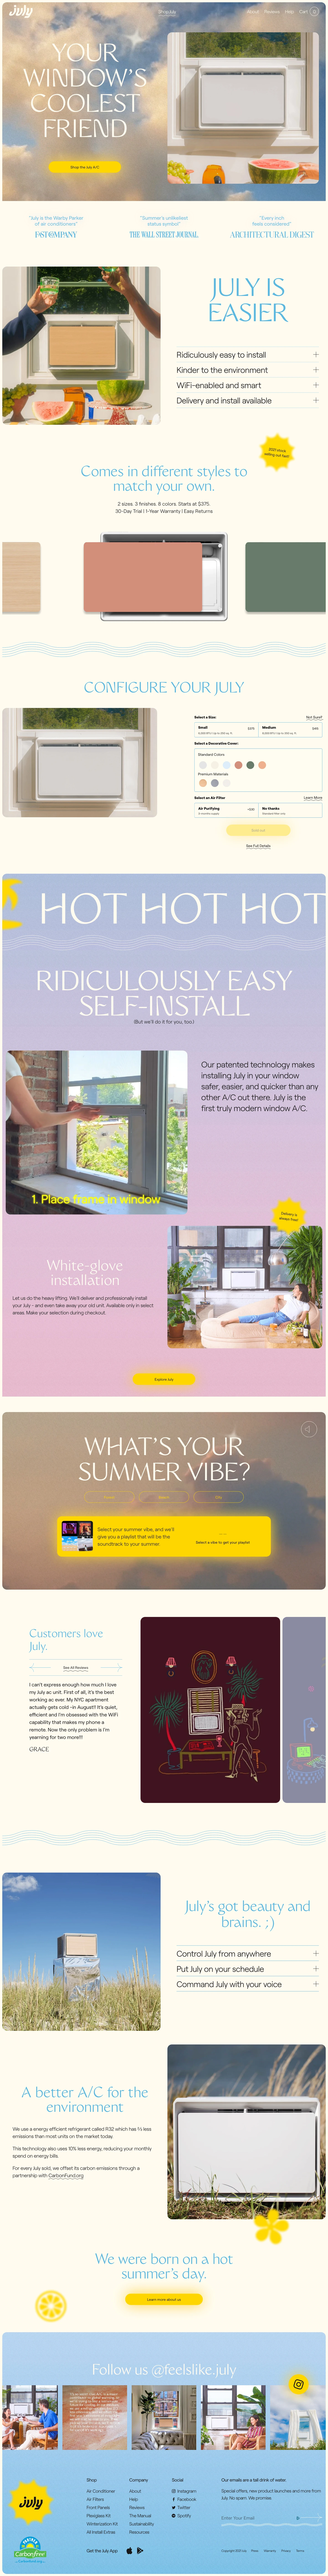 July Landing Page Example: Dive into summer with a window A/C you'll actually love. Shop the A/C we designed for easy-installation, improved energy-efficiency, and environmental friendliness.